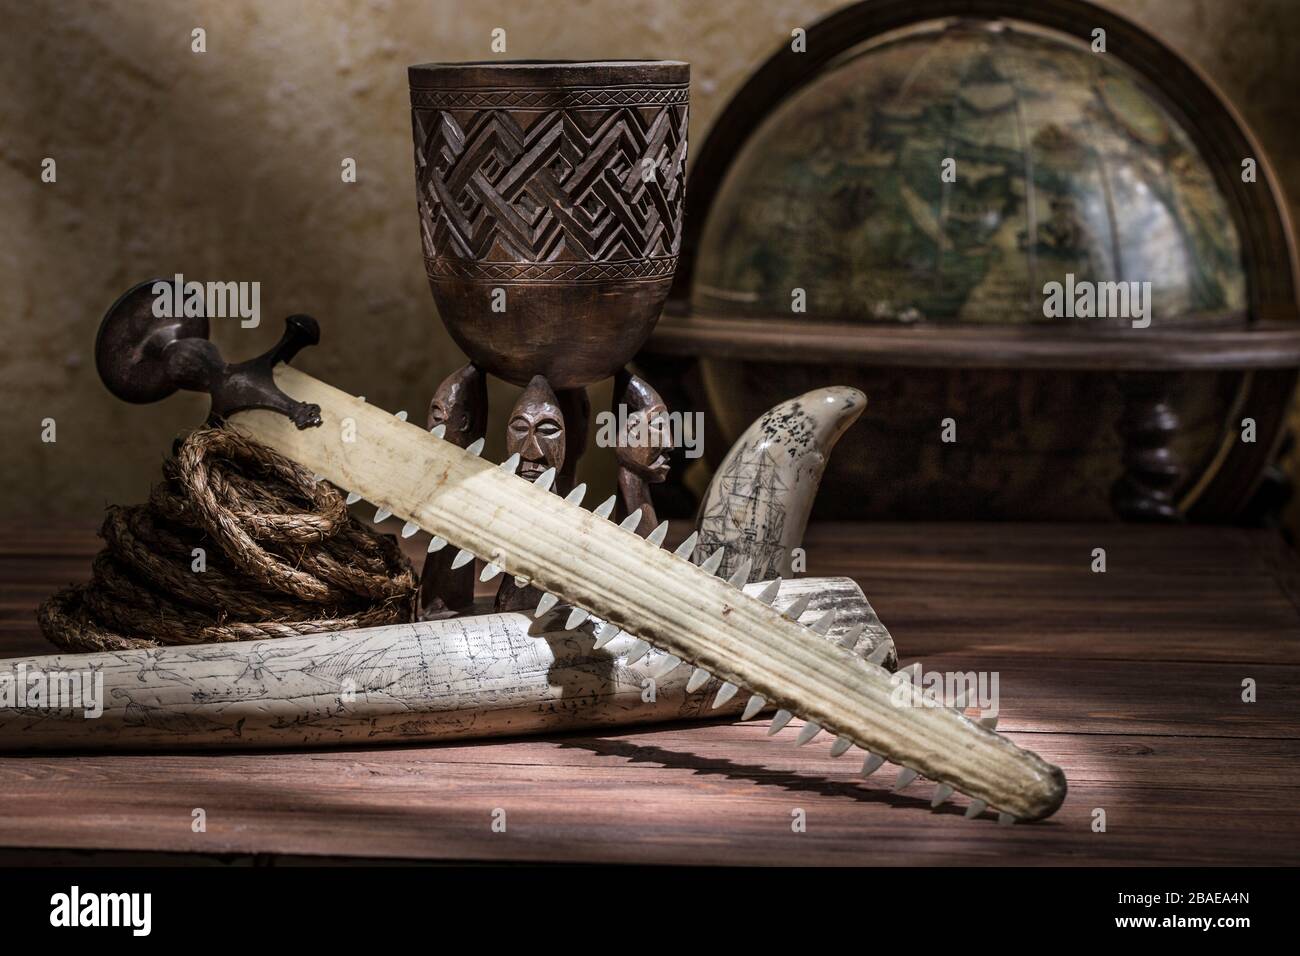 Stlll life of the 19th century sea voyage with old indian talvar (sabre), rope, globe and etching on a walrus tusk Stock Photo